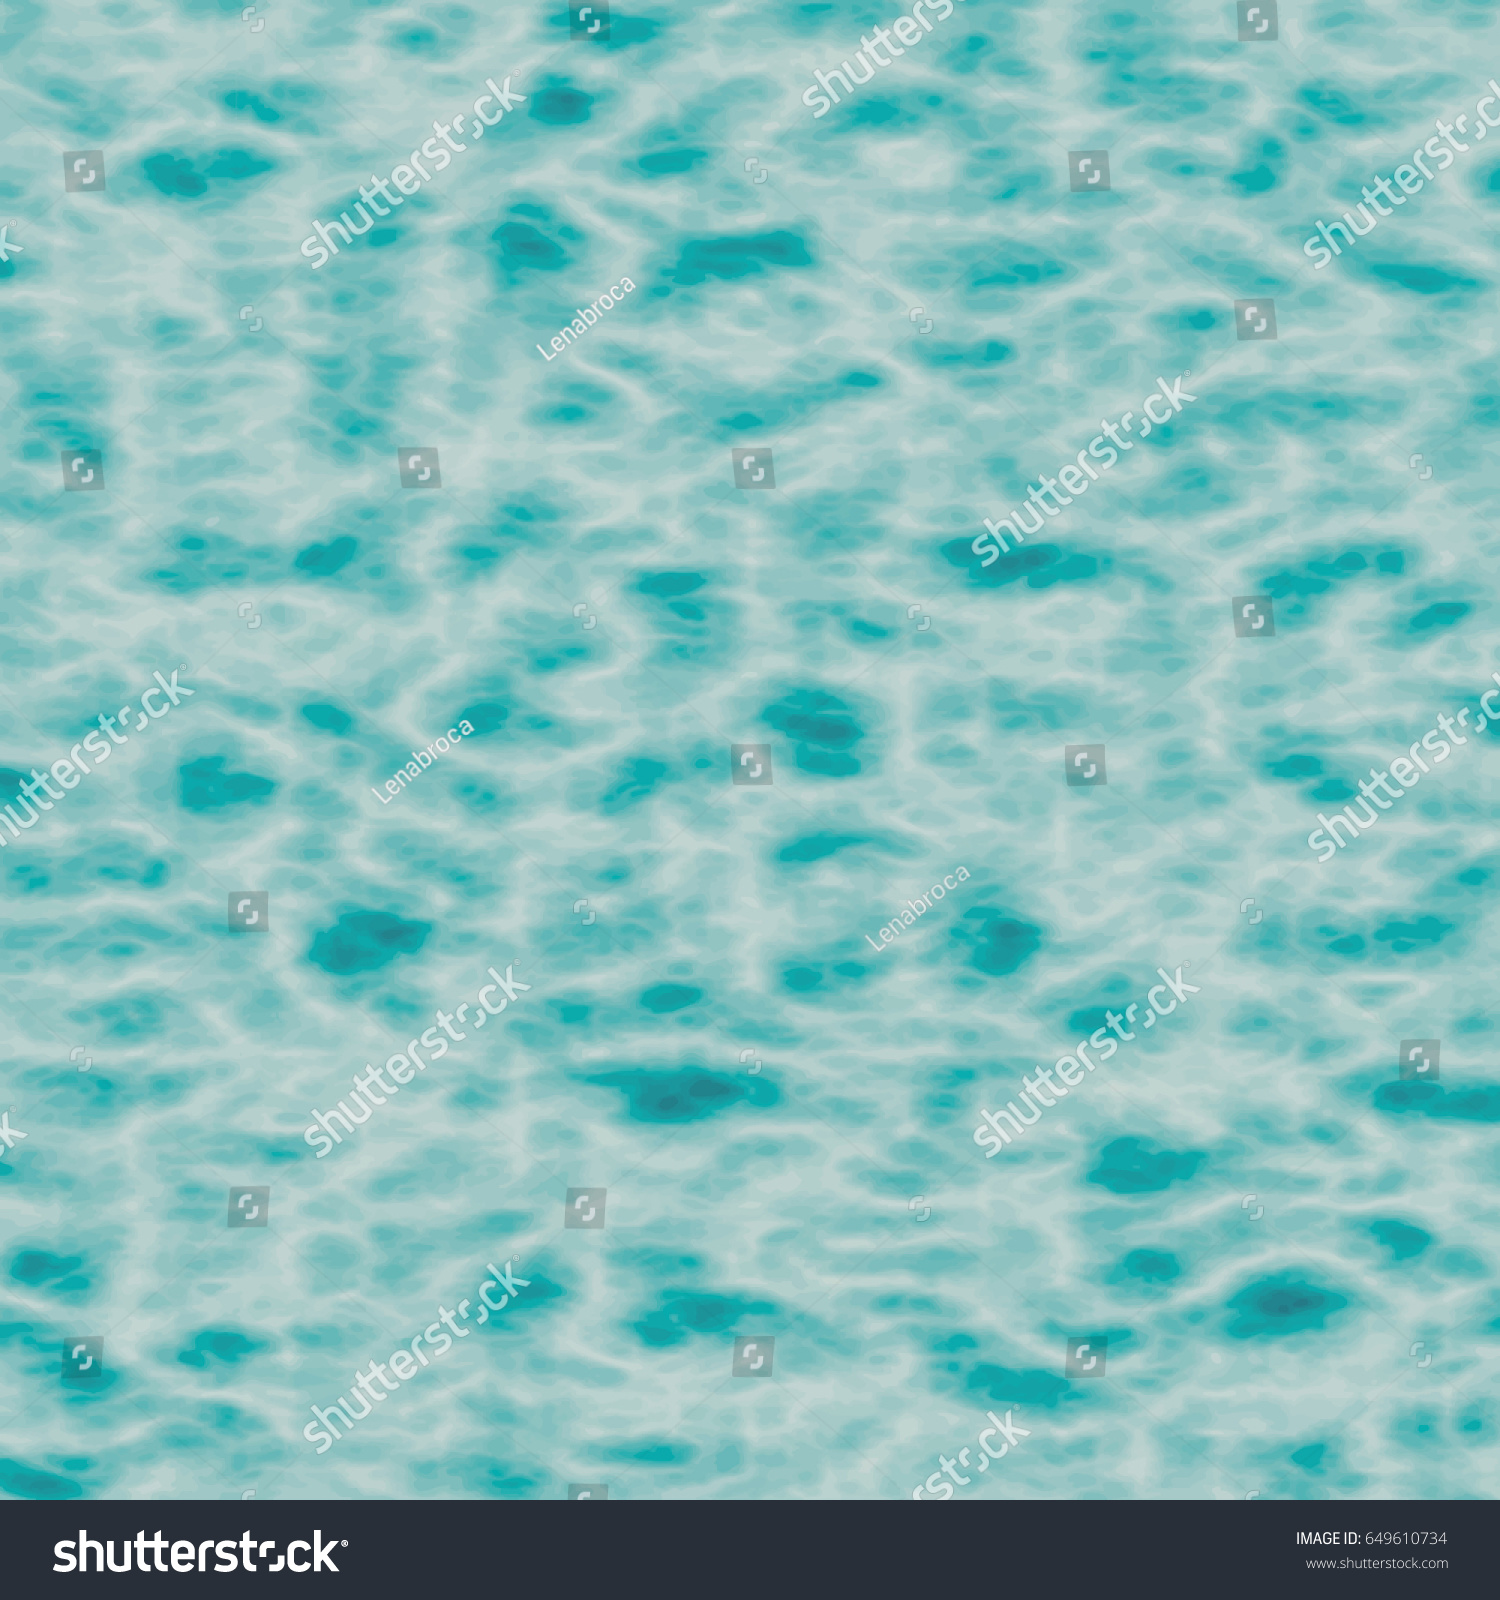 Abstract Background Seawater Texture Vector Illustration Stock ...